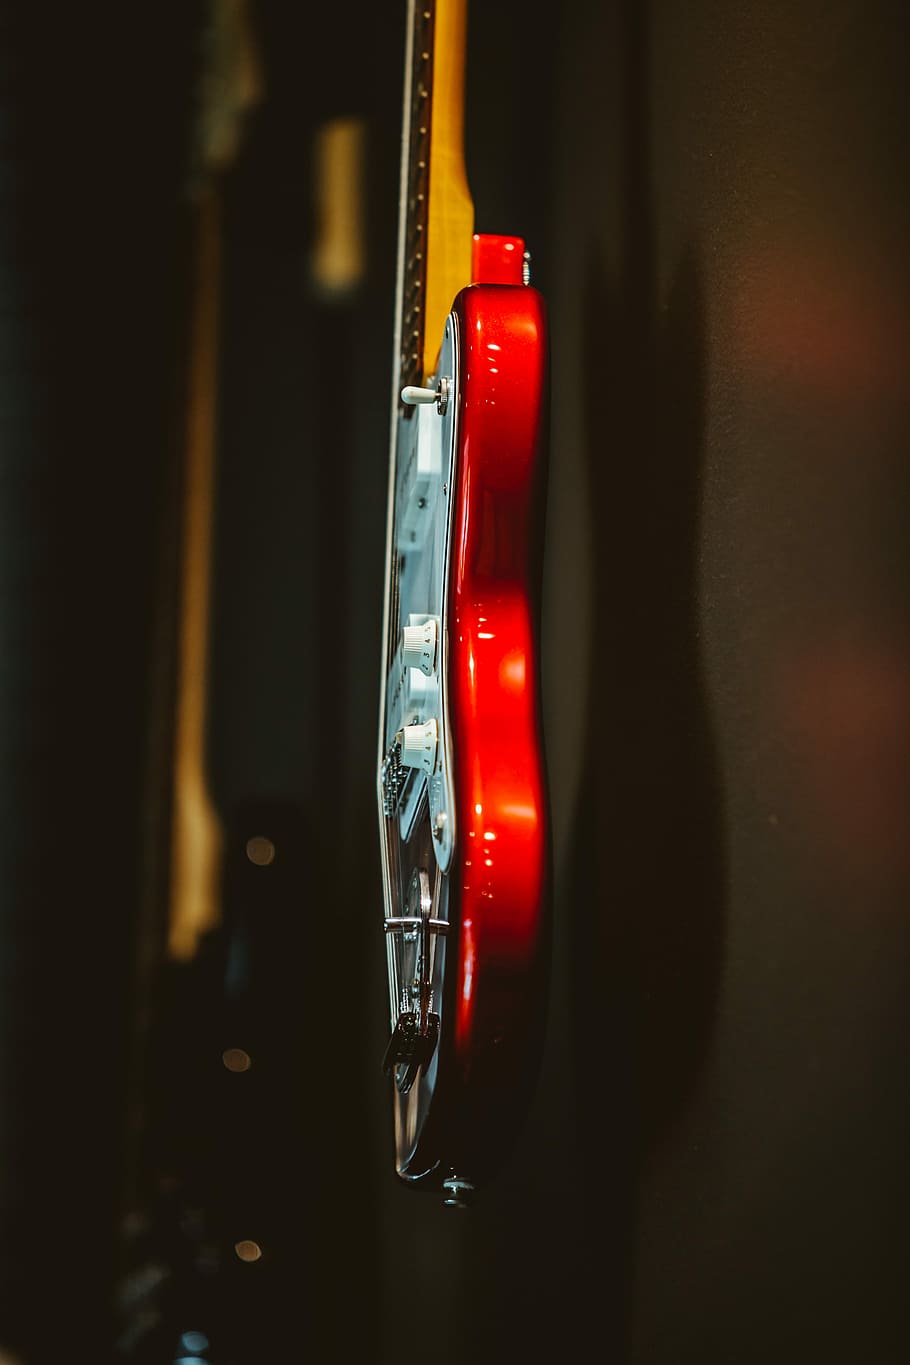 white and red stratocaster electric guitar hanging on wall, shallow focus photography of red and white electric guitar, HD wallpaper